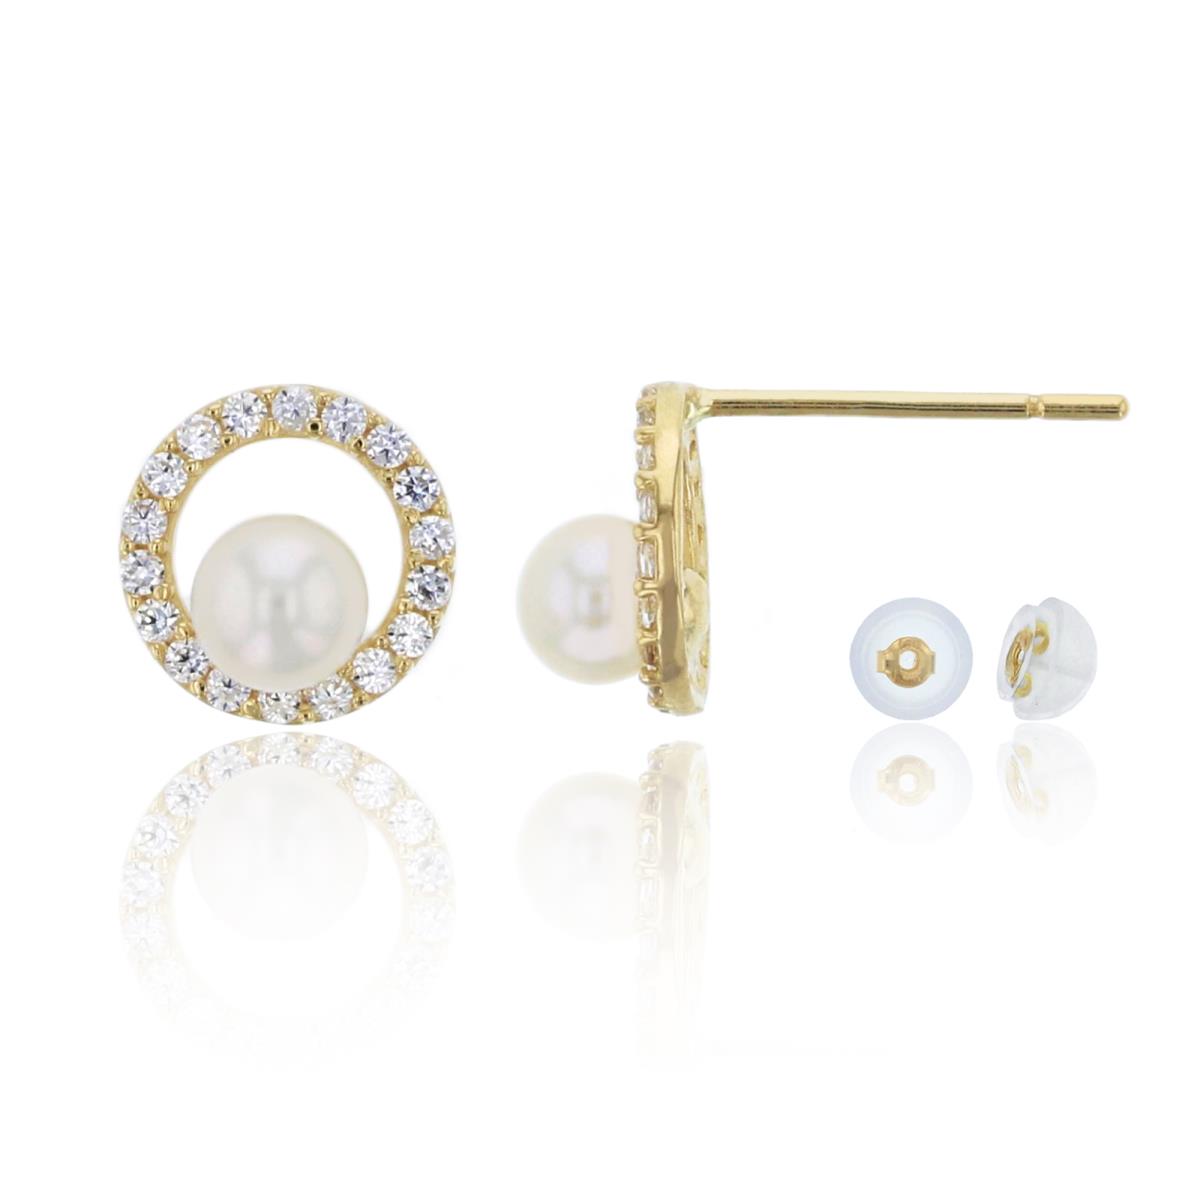 10K Yellow Gold 3mm Fresh Water Pearl & CZ Round Stud Earring & 10K Silicone Back